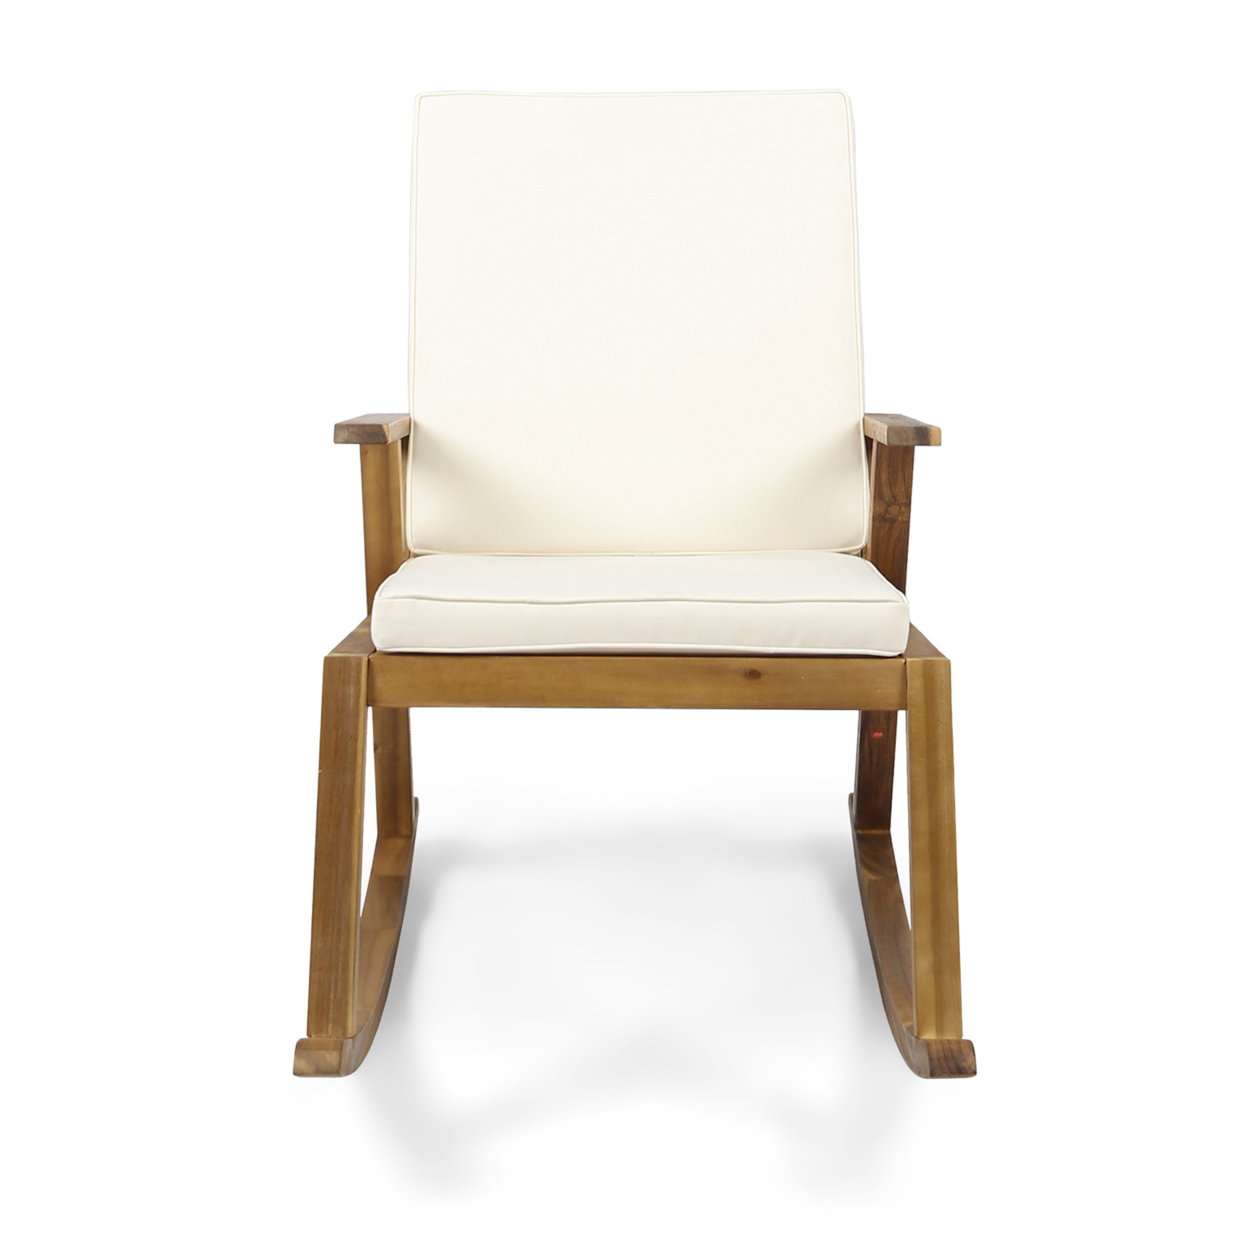 Alize Outdoor Acacia Wood Rocking Chair and Side Table, Teak and Cream - image 2 of 7